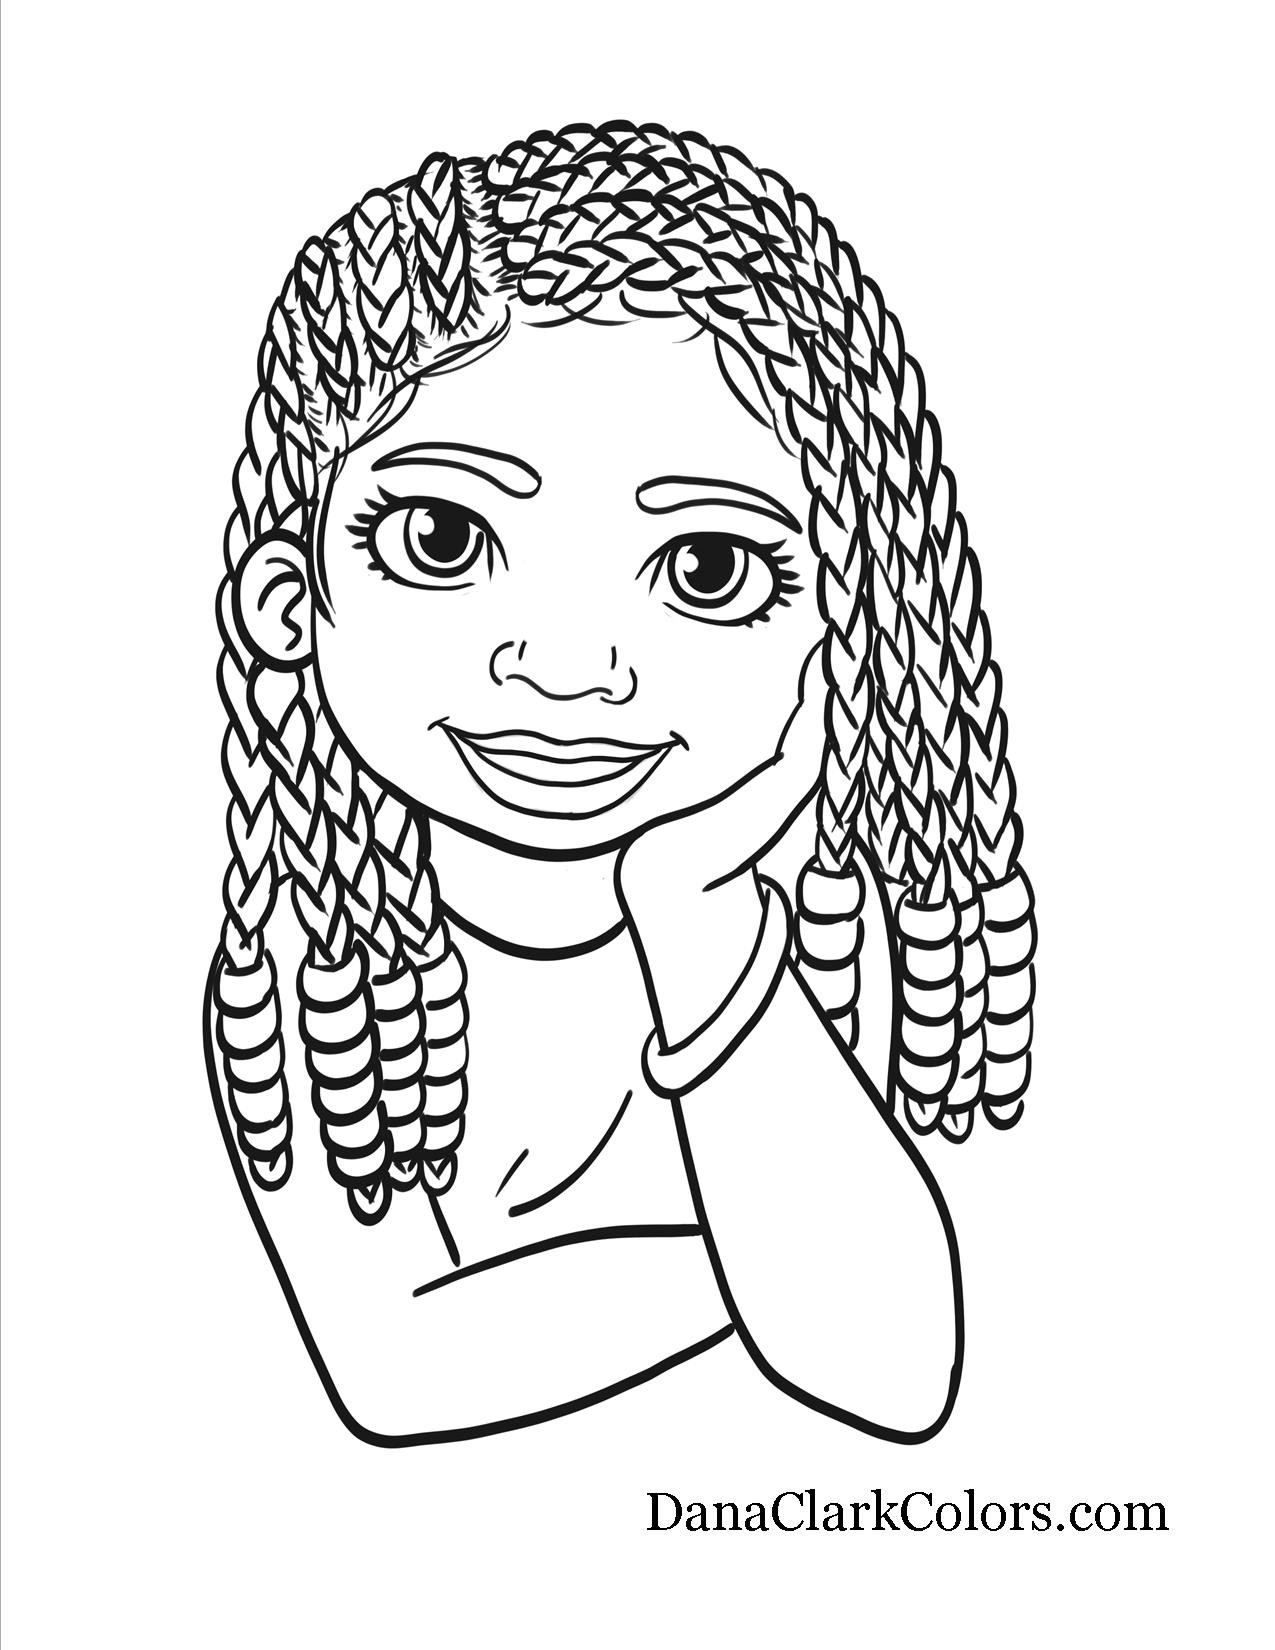 Black Girl Magic Coloring Pages
 Free Coloring Page 3 DanaClarkColors